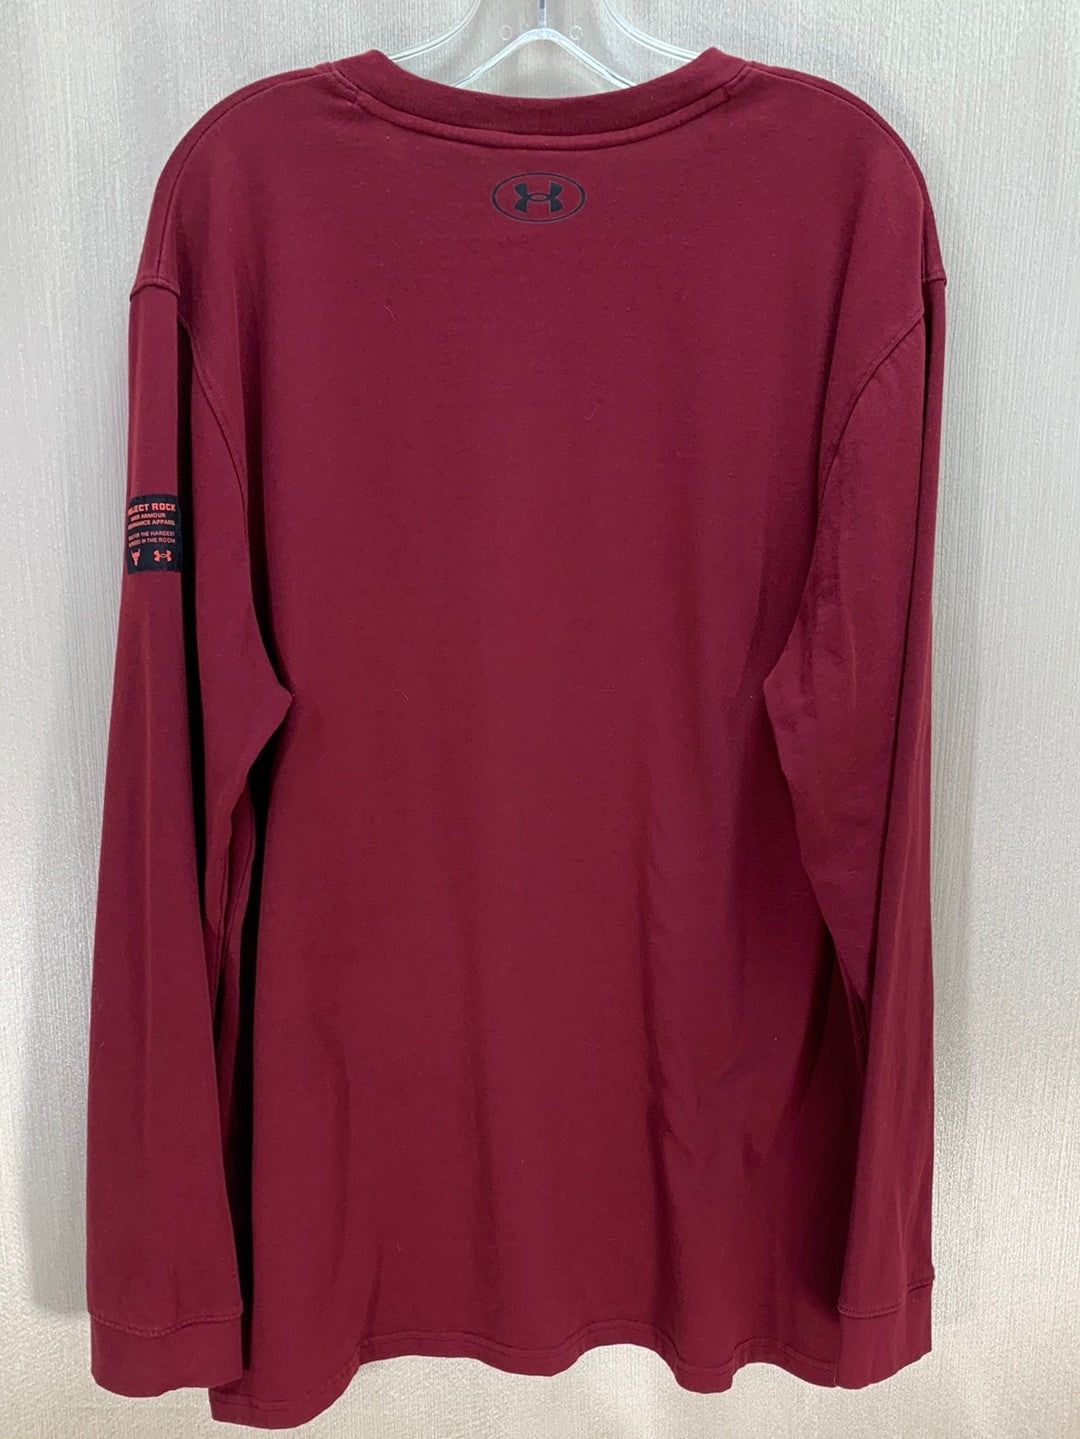 UNDER ARMOUR dark red Bull Project Rock Loose Fit LS T-Shirt - XL